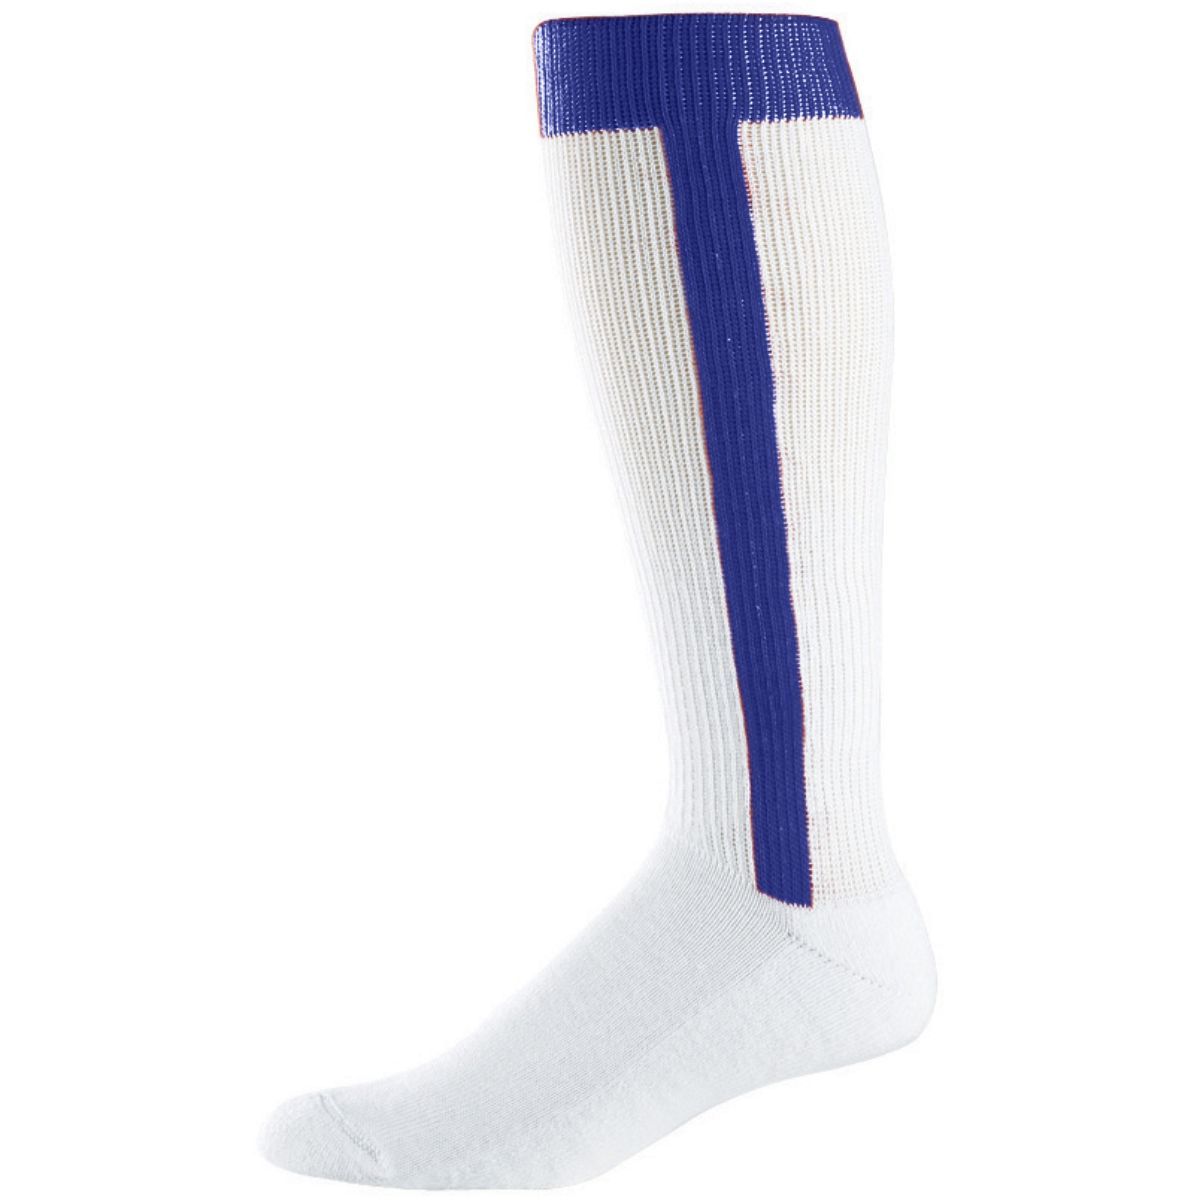 Augusta Sportswear Baseball Stirrup Sock in Purple  -Part of the Accessories, Augusta-Products, Accessories-Socks, Baseball, All-Sports, All-Sports-1 product lines at KanaleyCreations.com